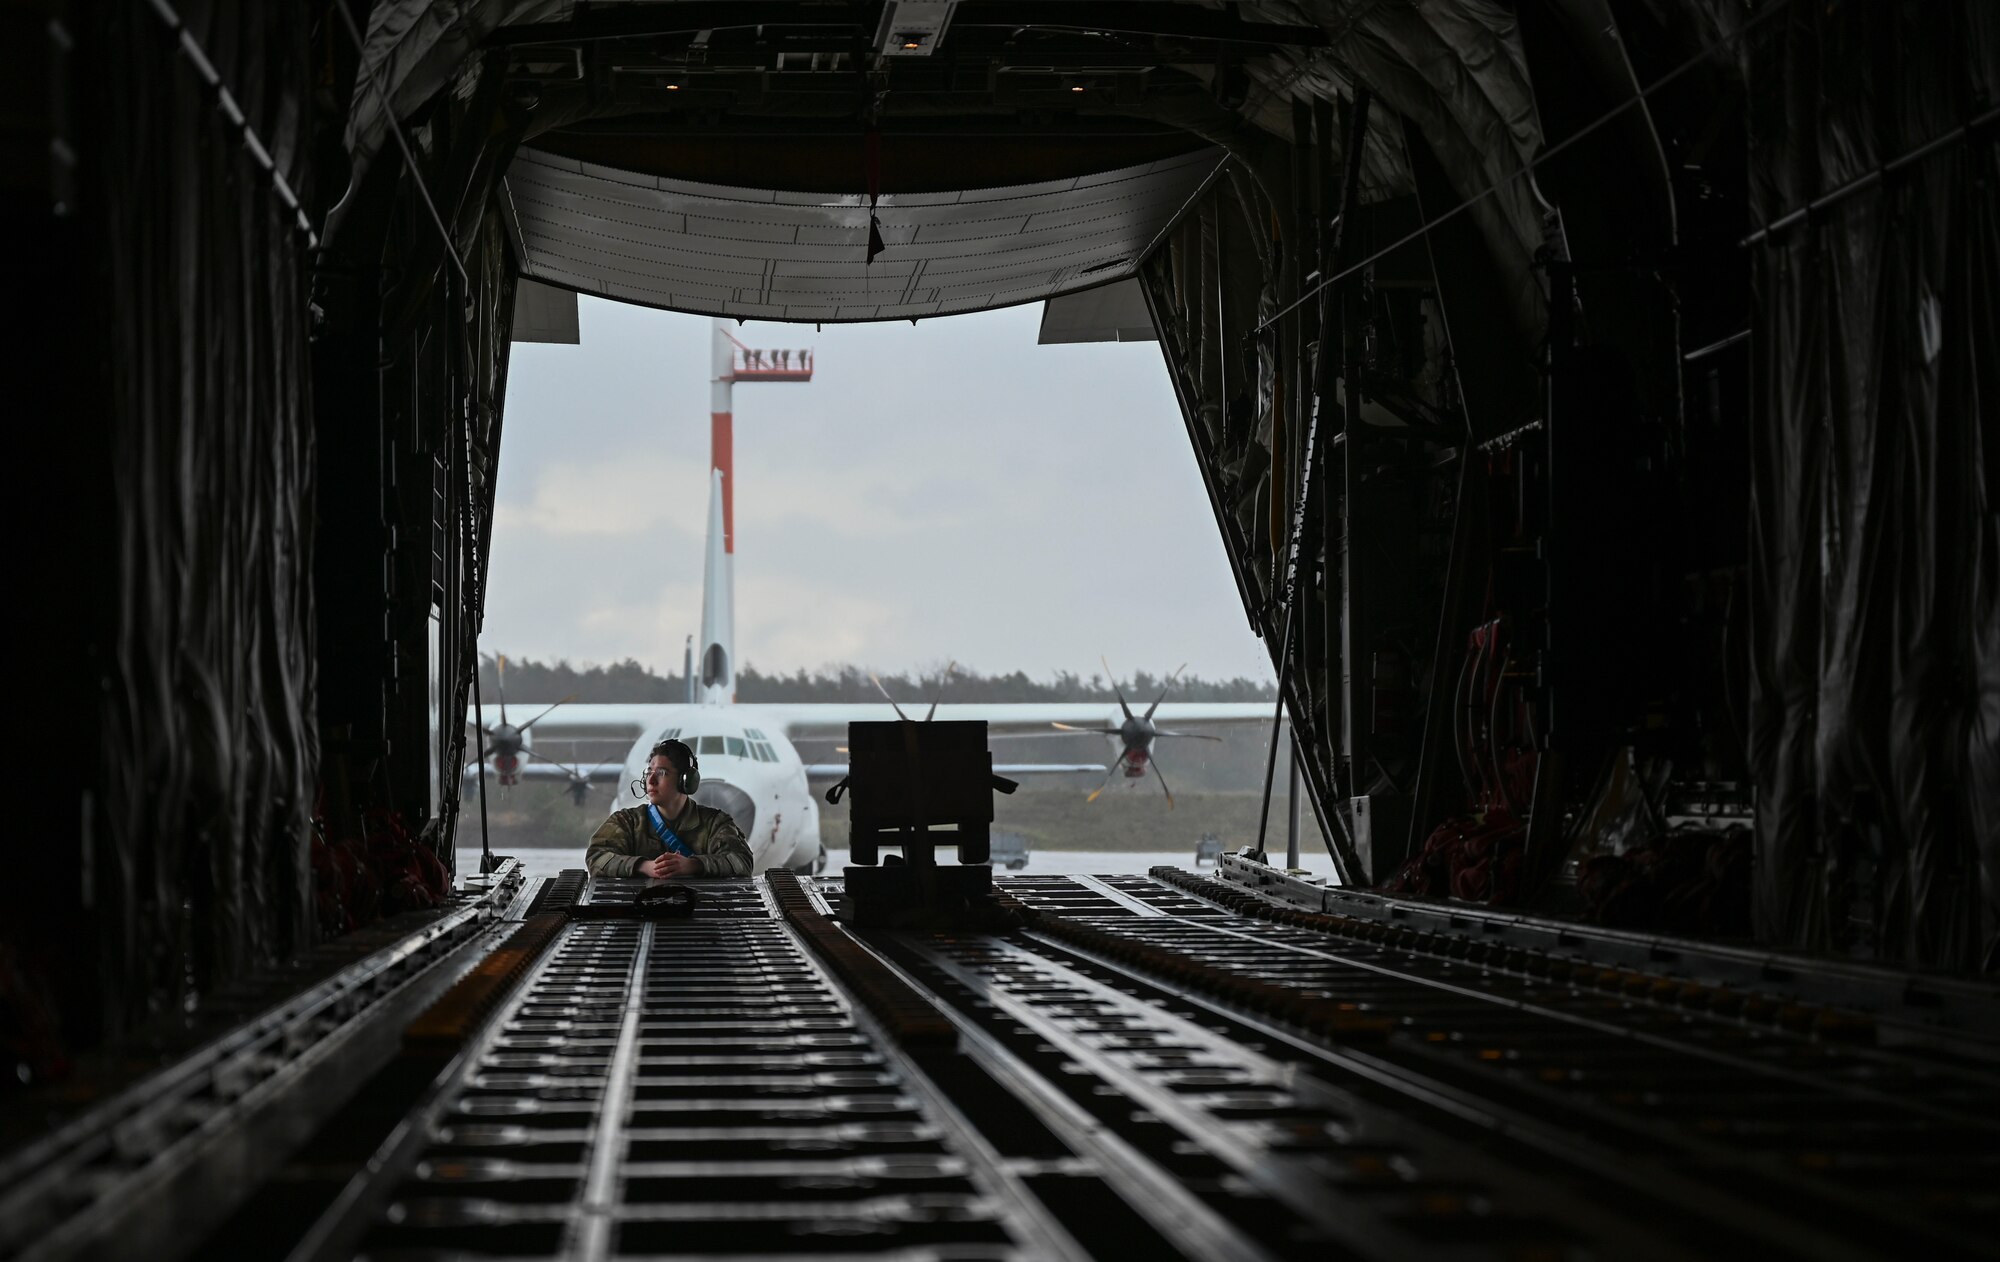 U.S. Air Force Senior Airman Donovan Elledge, 86th Aircraft Maintenance Squadron C-130J Super Hercules hydraulics journeyman, rests on the ramp of a  C-130J aircraft at Ramstein Air Base, Germany, March 31, 2023.